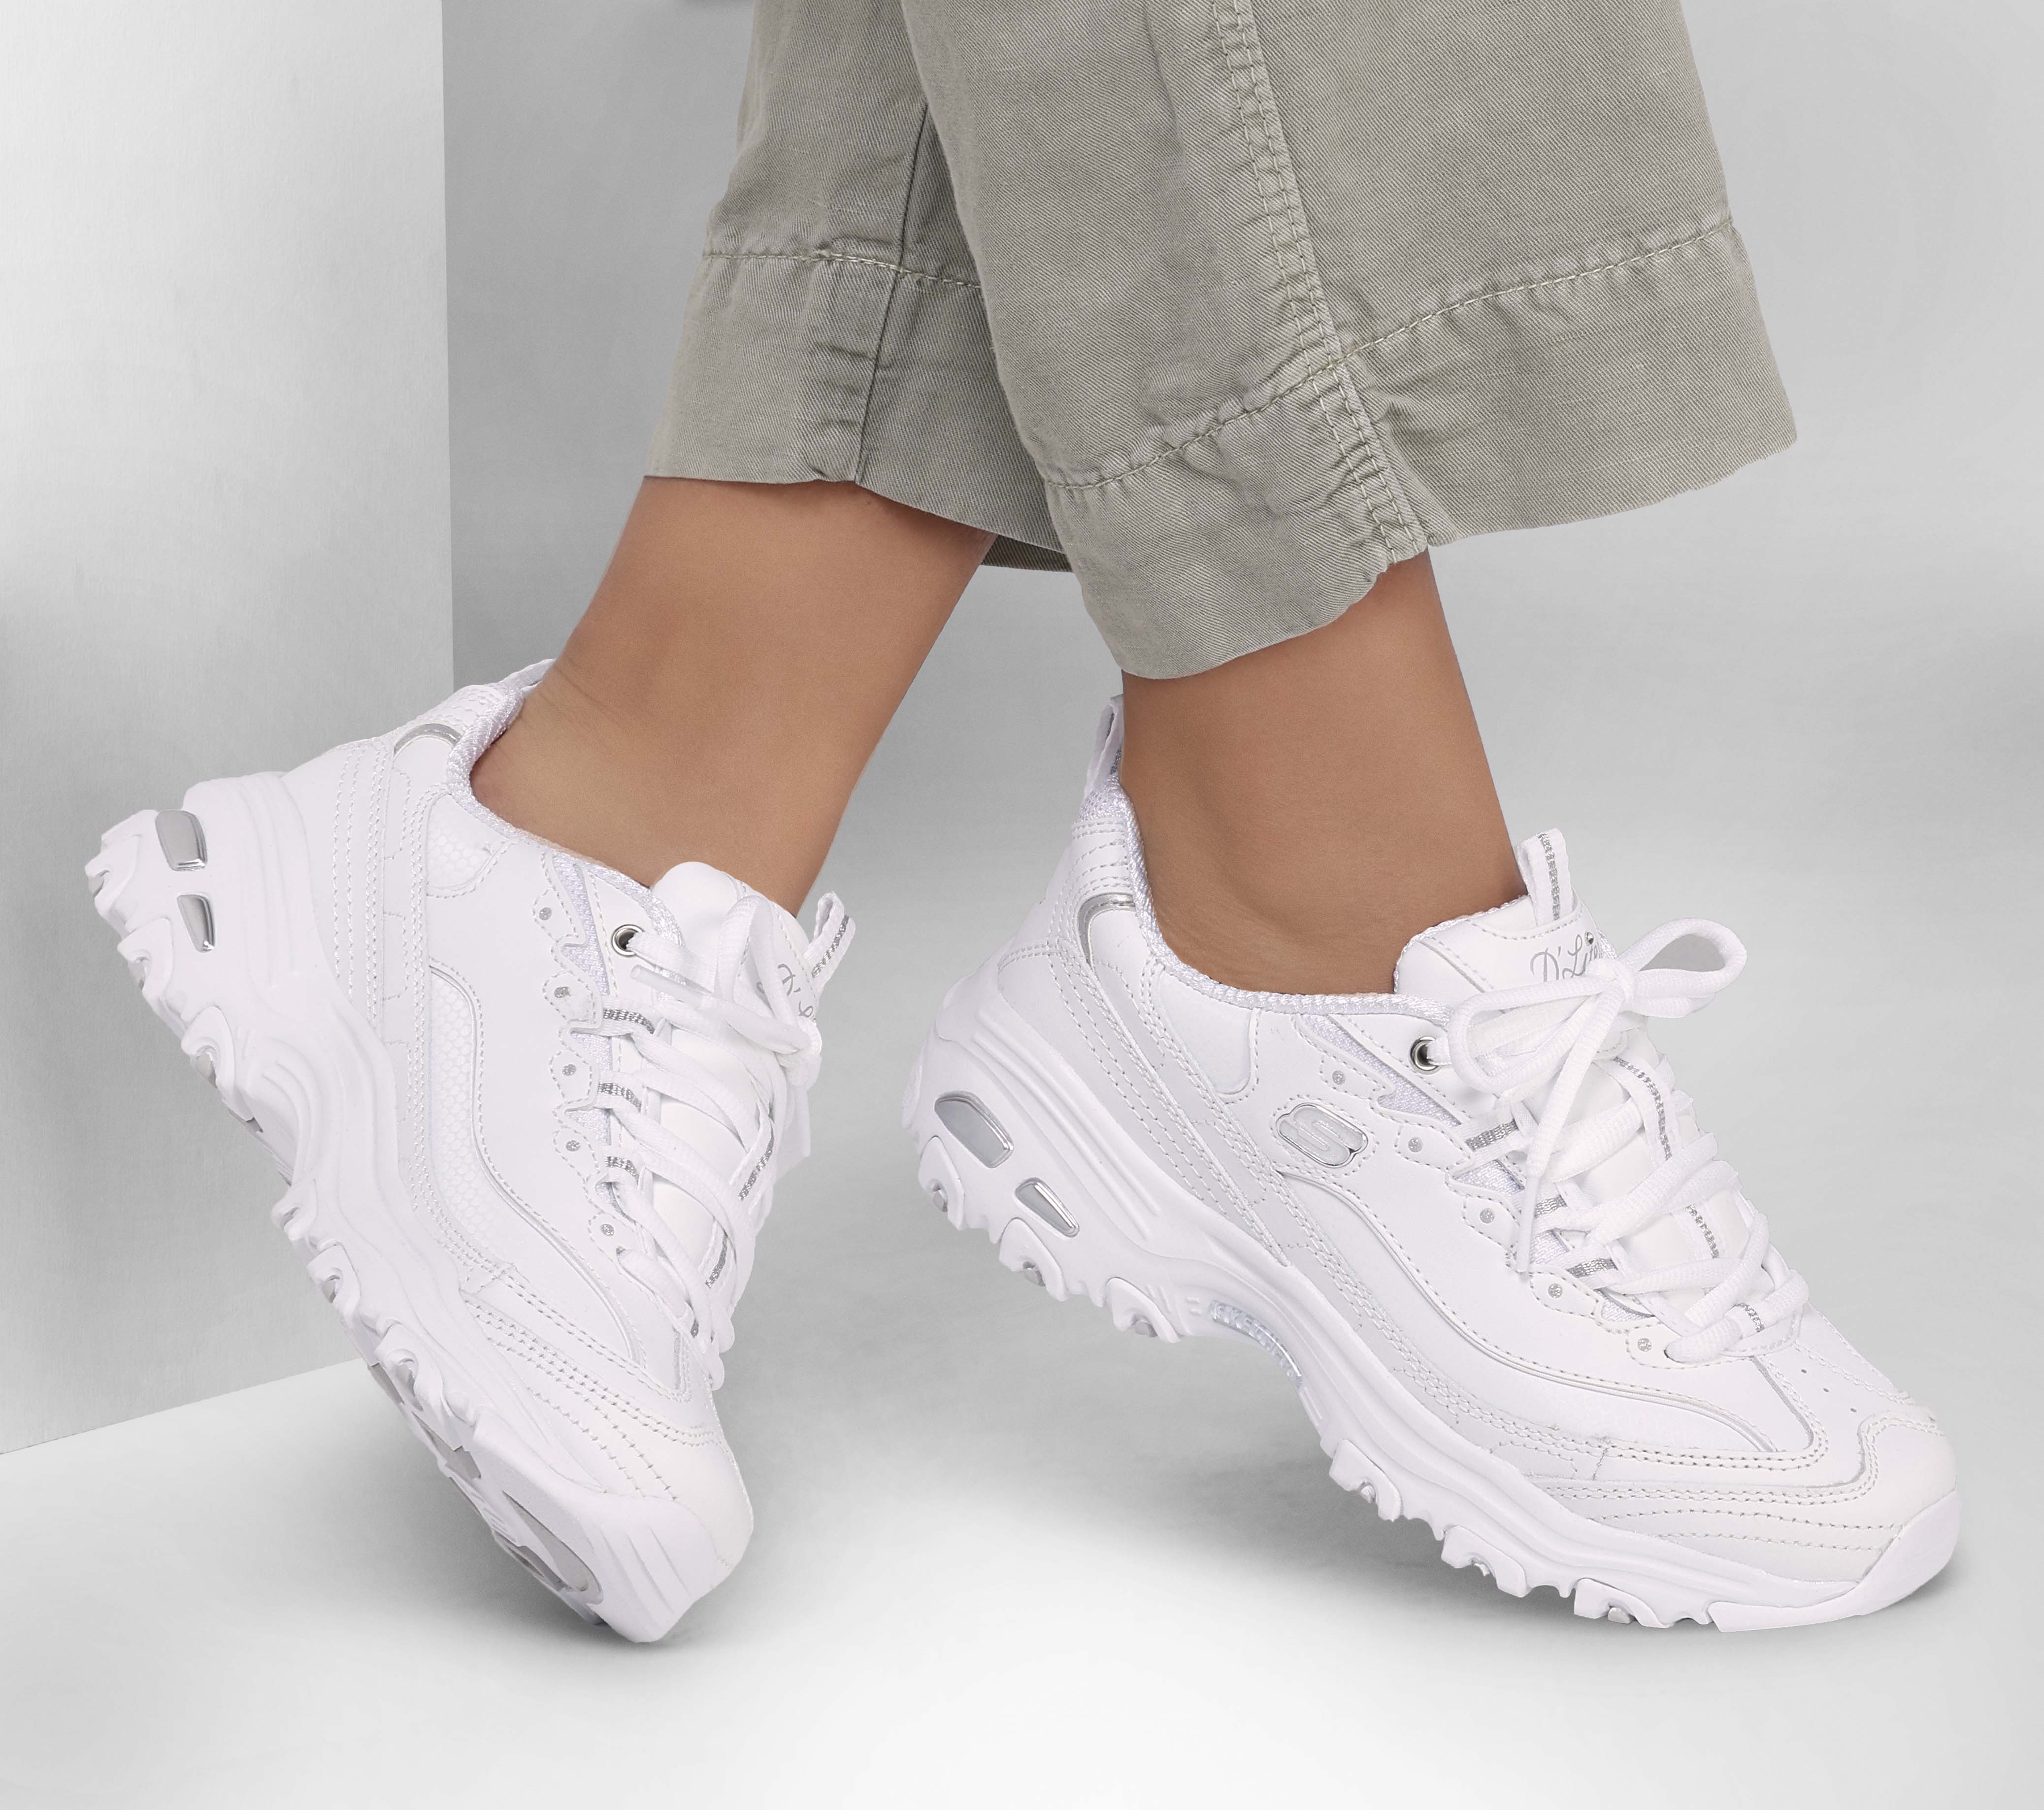 SKECHERS USA on X: Obsessing over this D'Lites style #NinaDrama #dlites # skechers  / X